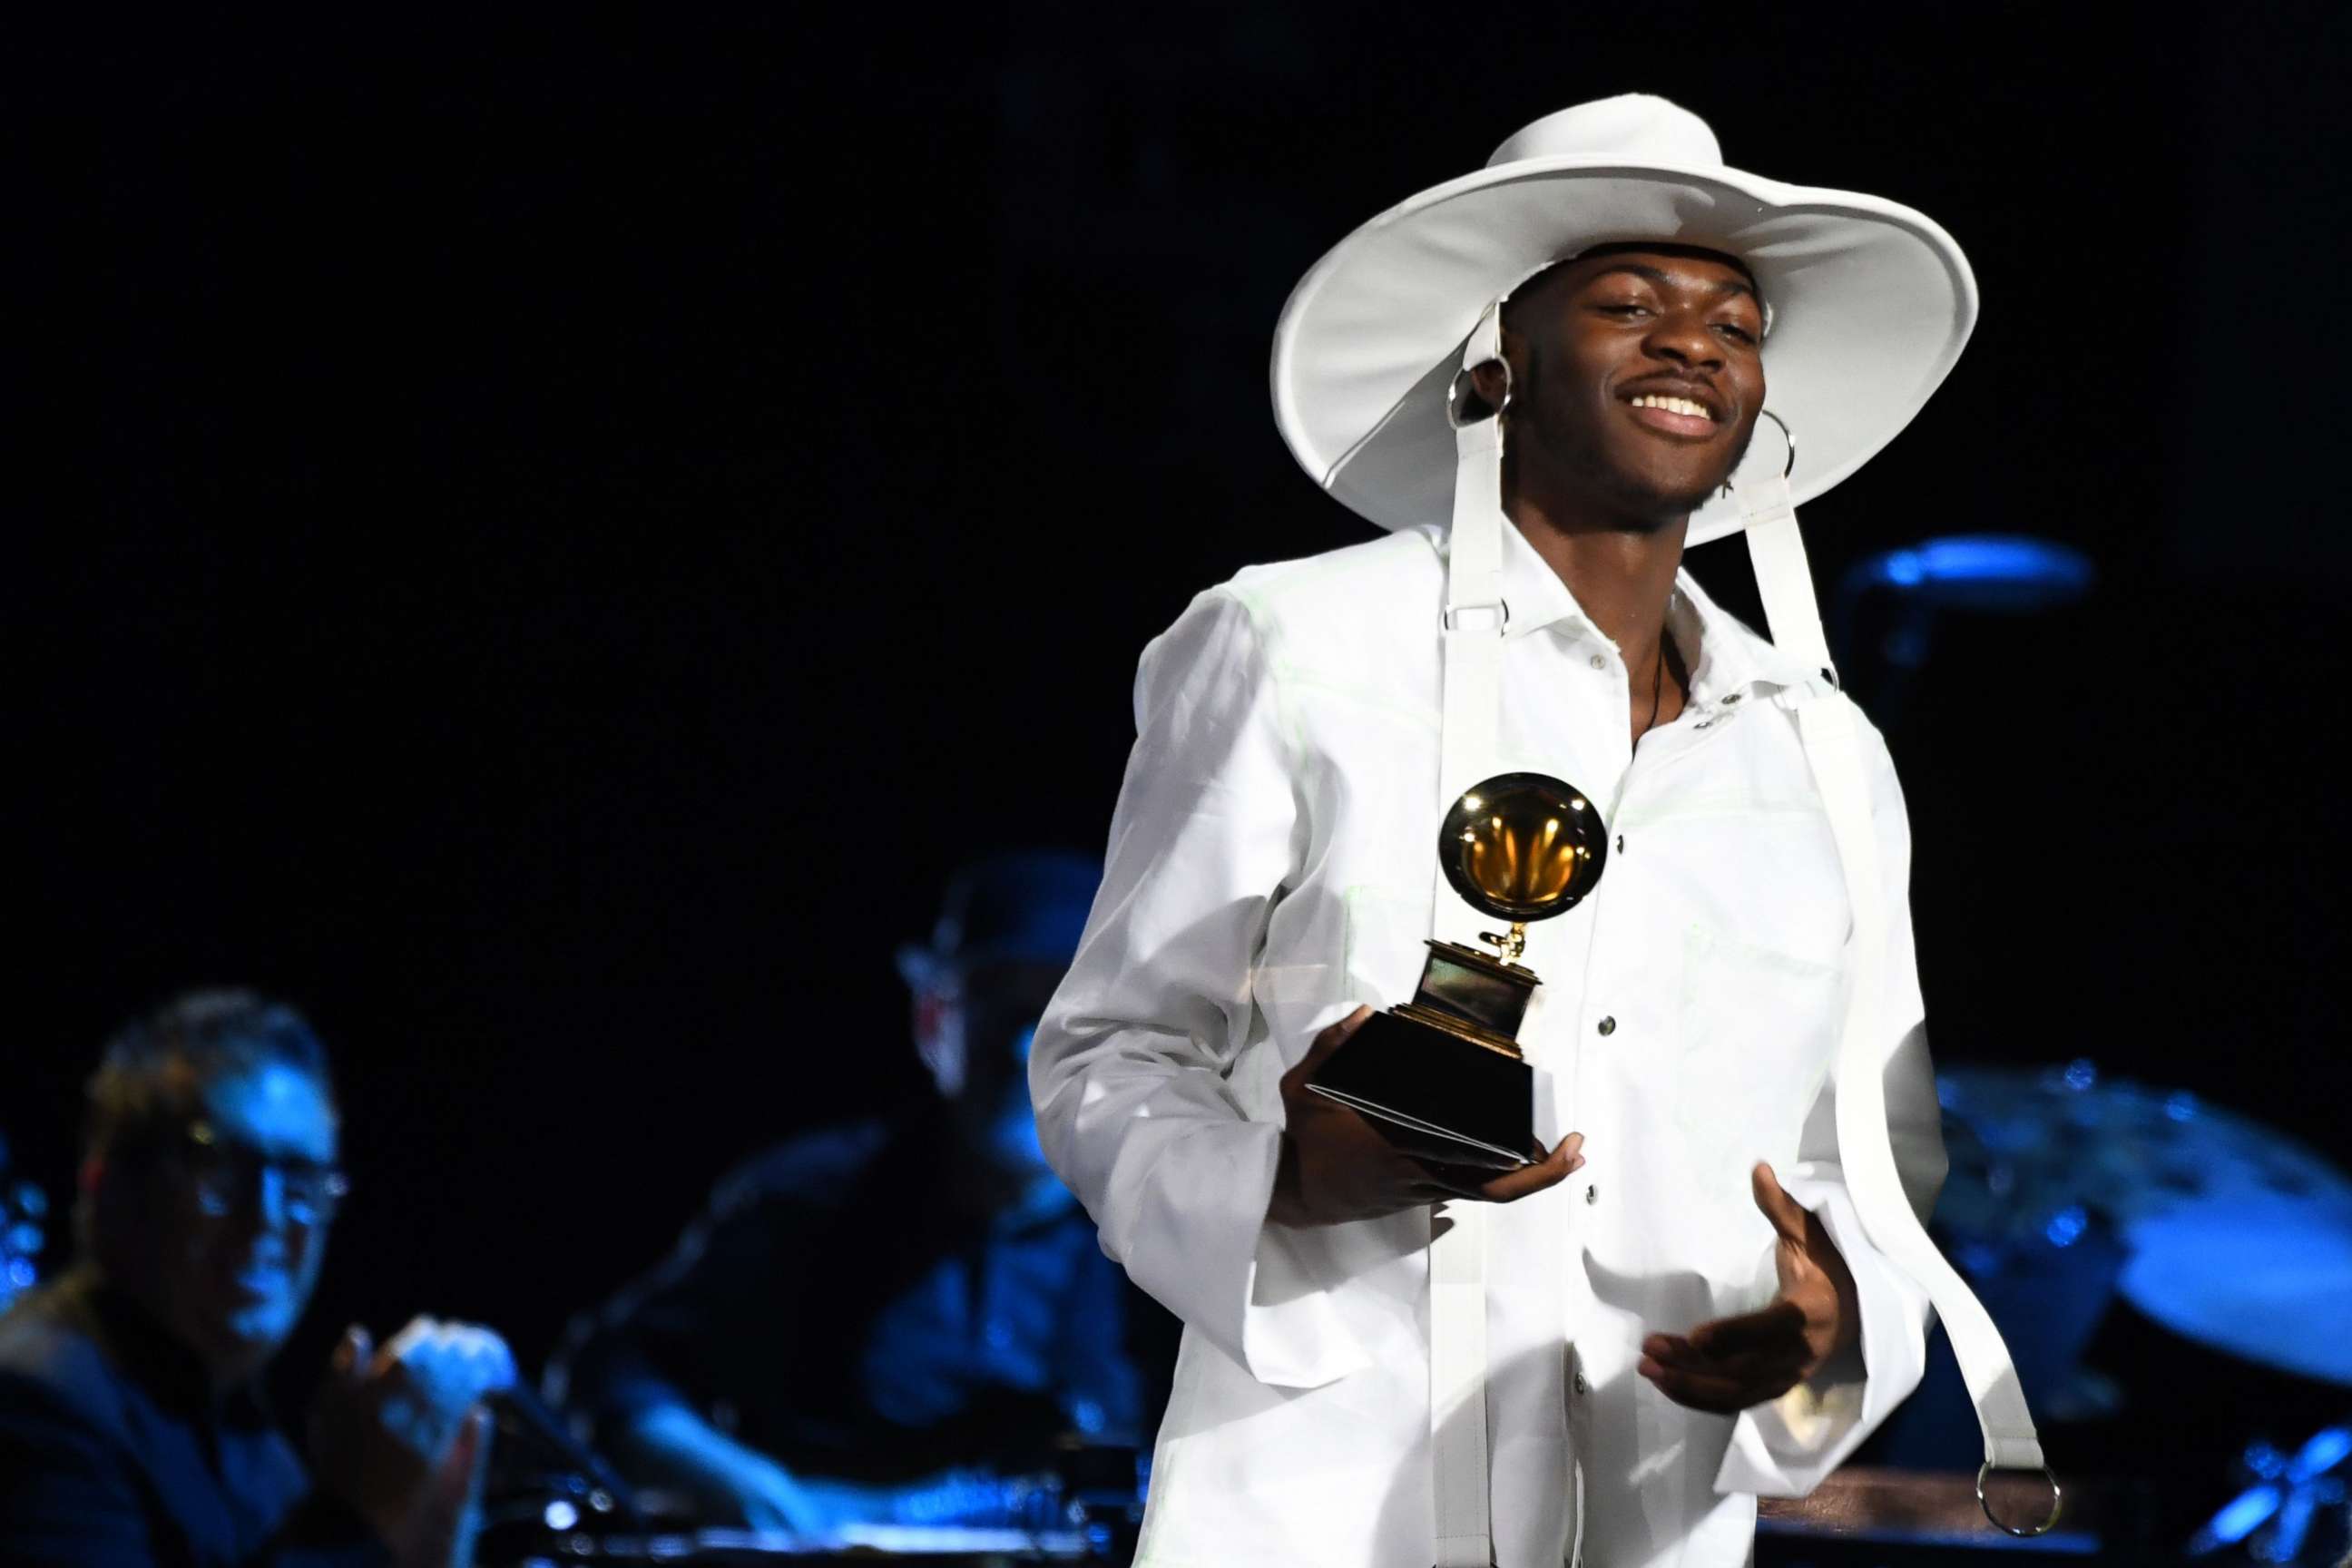 PHOTO: Lil Nas X arrives to accept the award for best Music Video for "Old Town Road" during the 62nd Annual Grammy Awards pre-telecast show on Jan. 26, 2020, in Los Angeles.